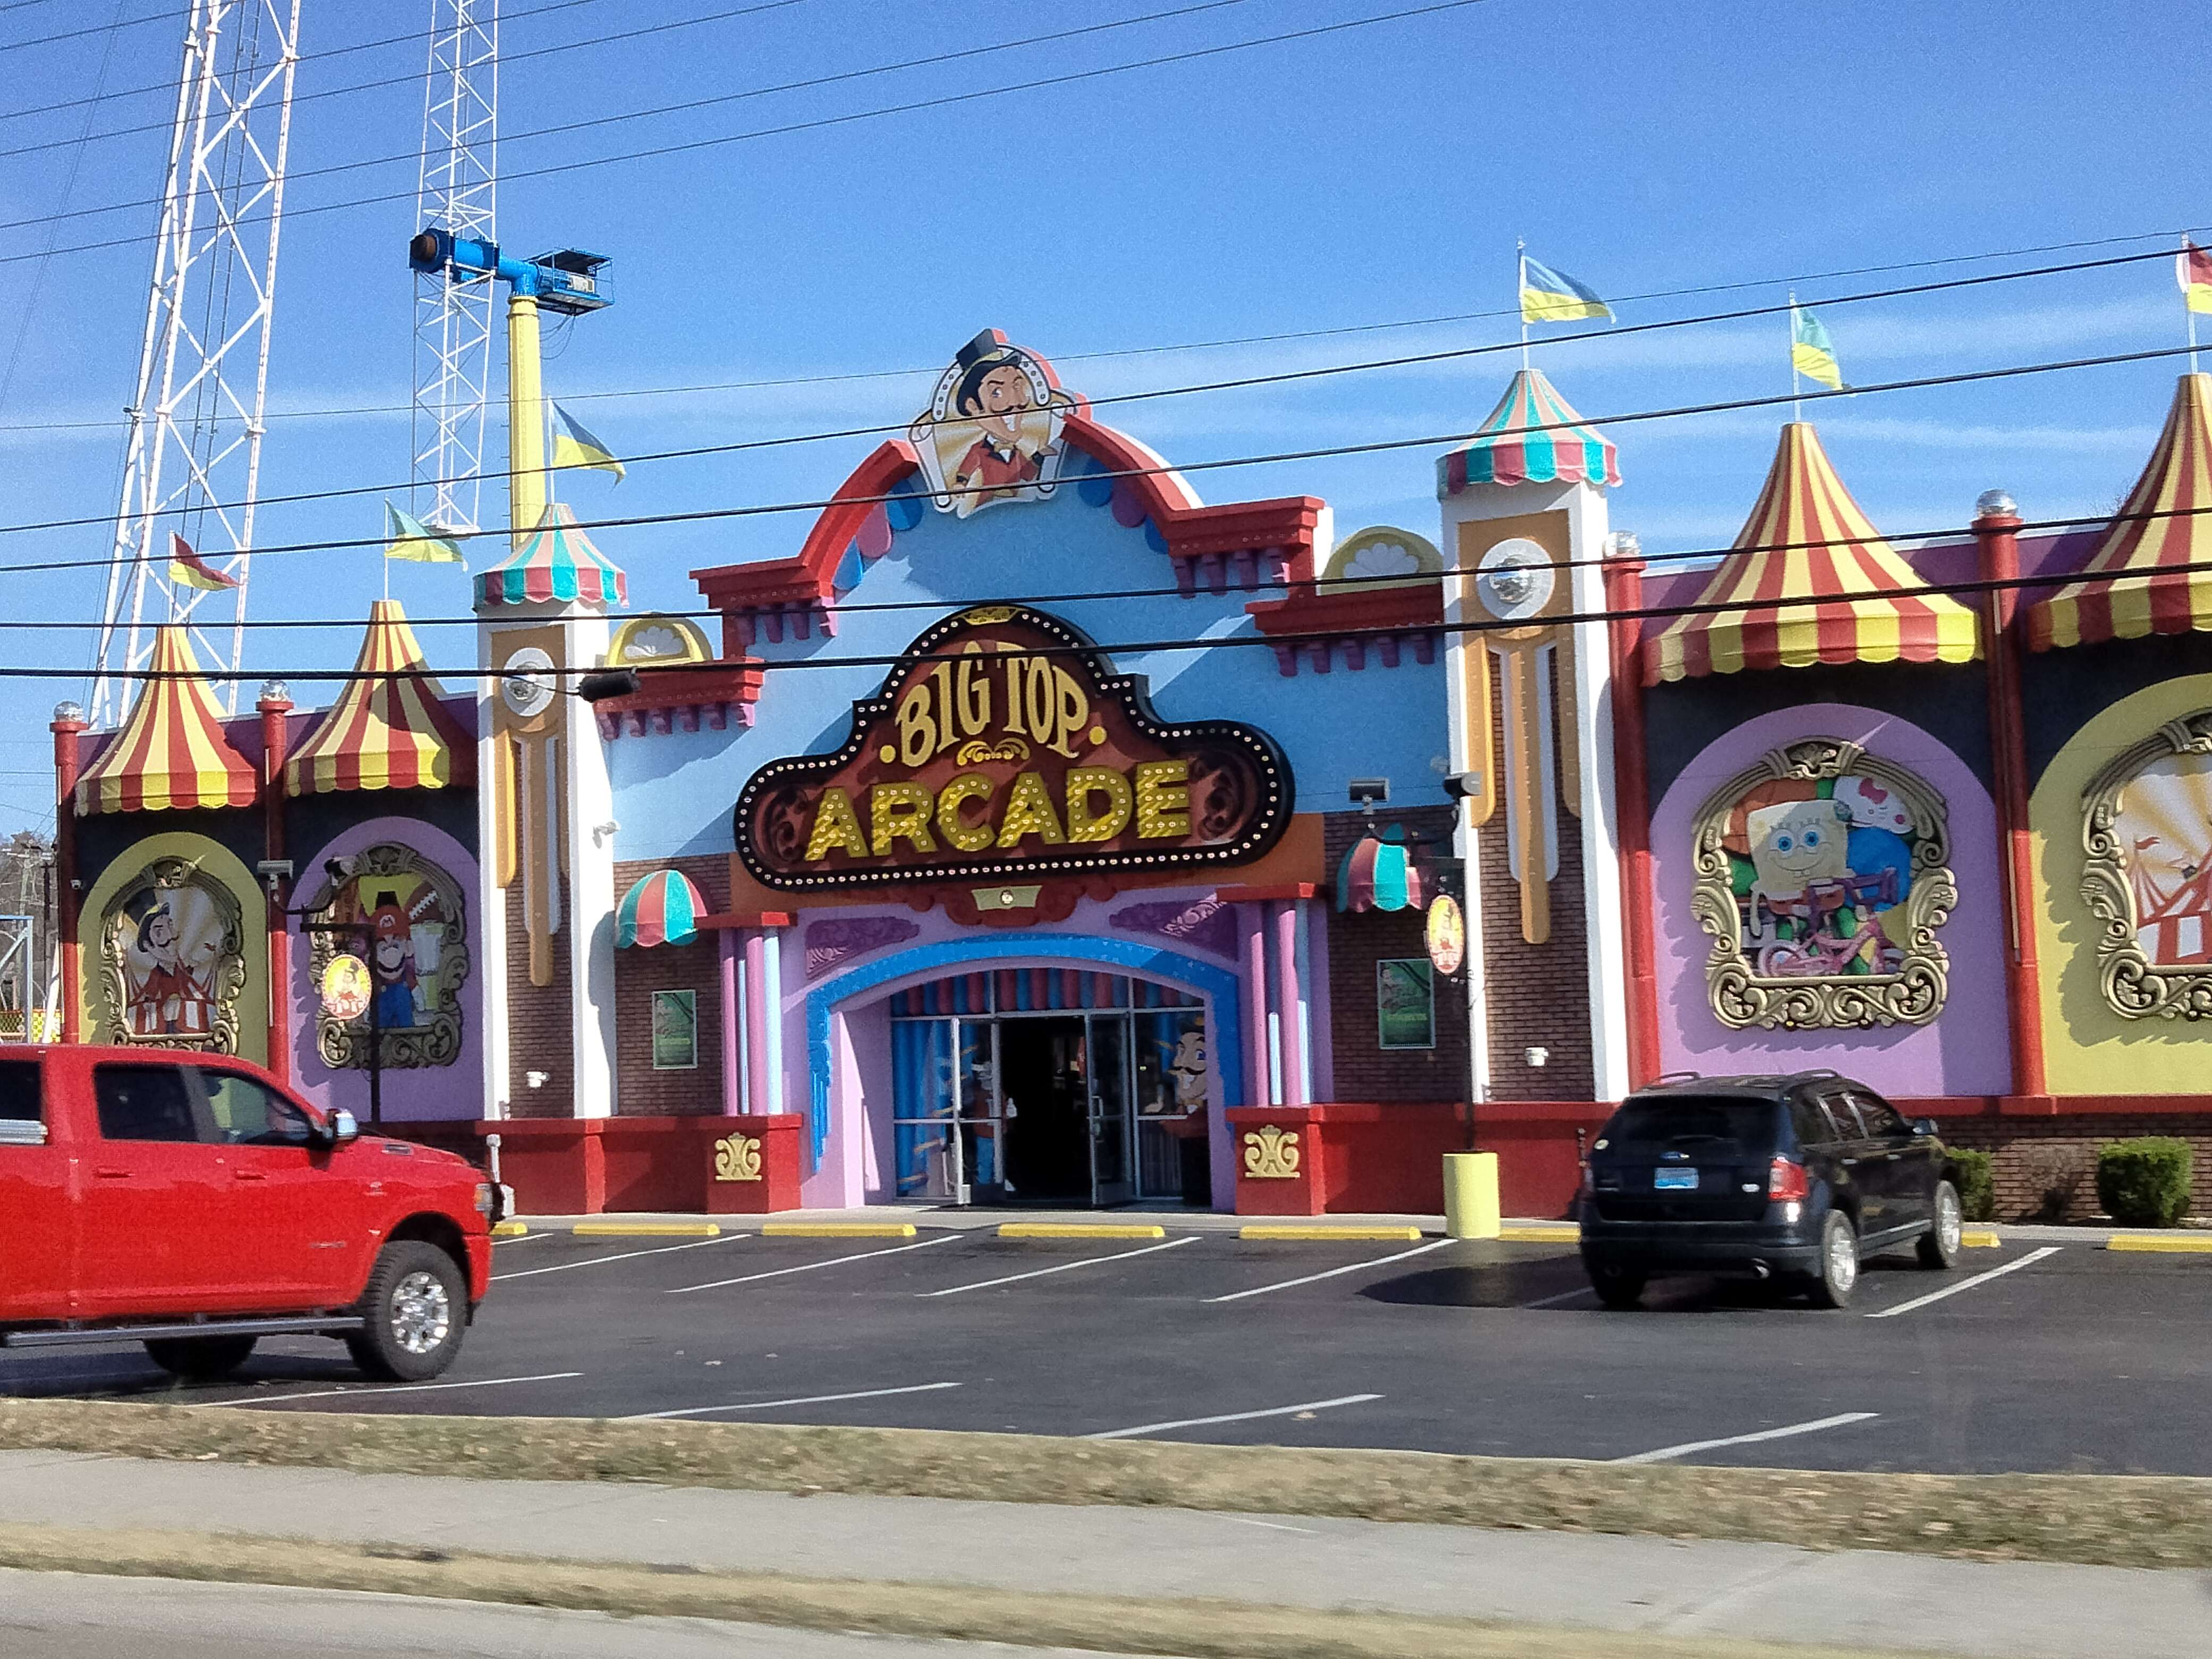 A picture of a roadside arcade taken from the perspective of someone sitting in the passenger seat of a car. The arcade is circus-themed and called Big Top Arcade with extravagantly themed architecture in primary colors.